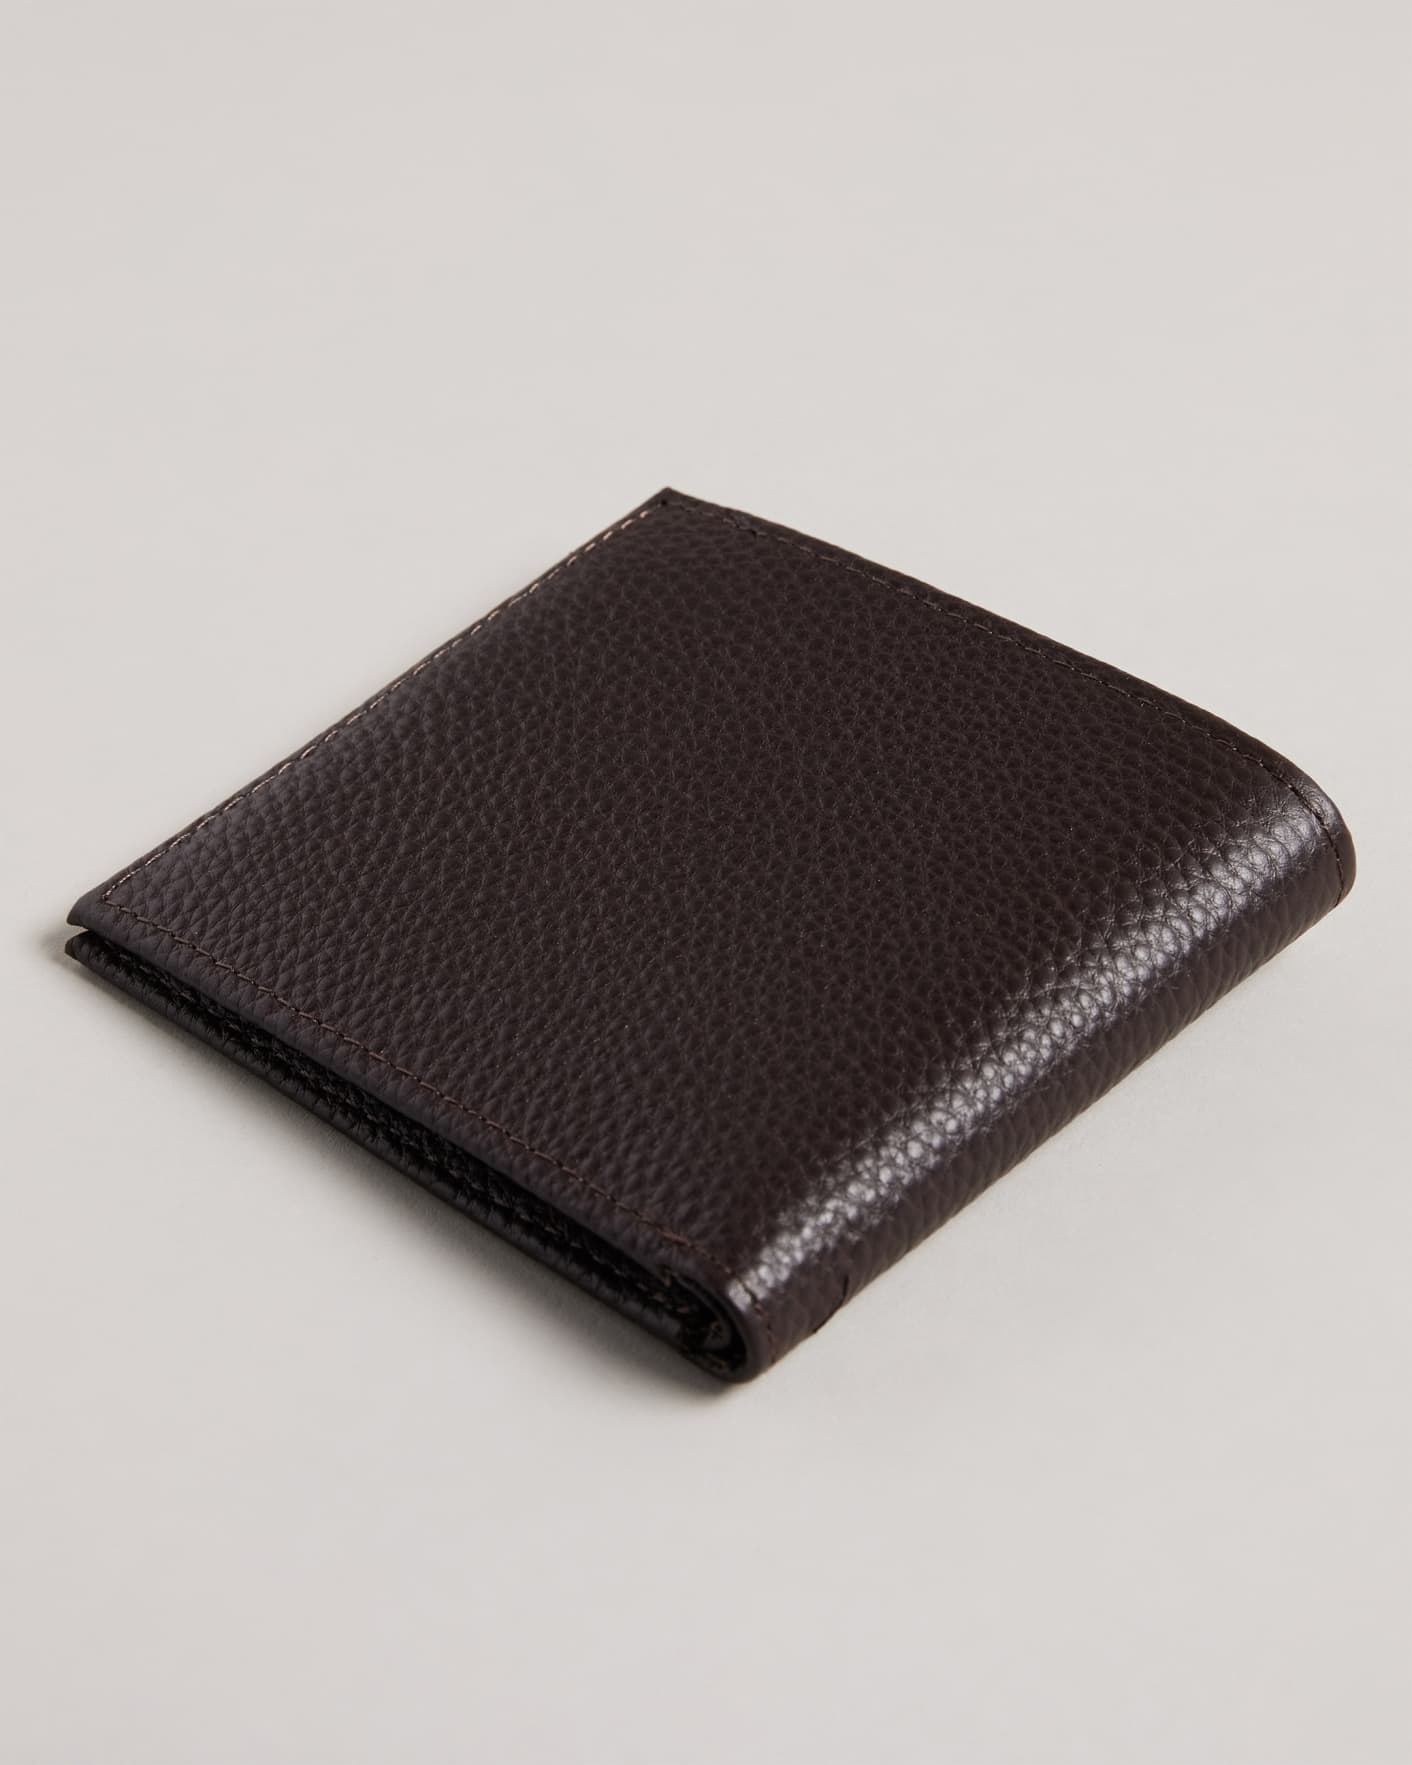 BRN-CHOC Leather Bifold Wallet Ted Baker